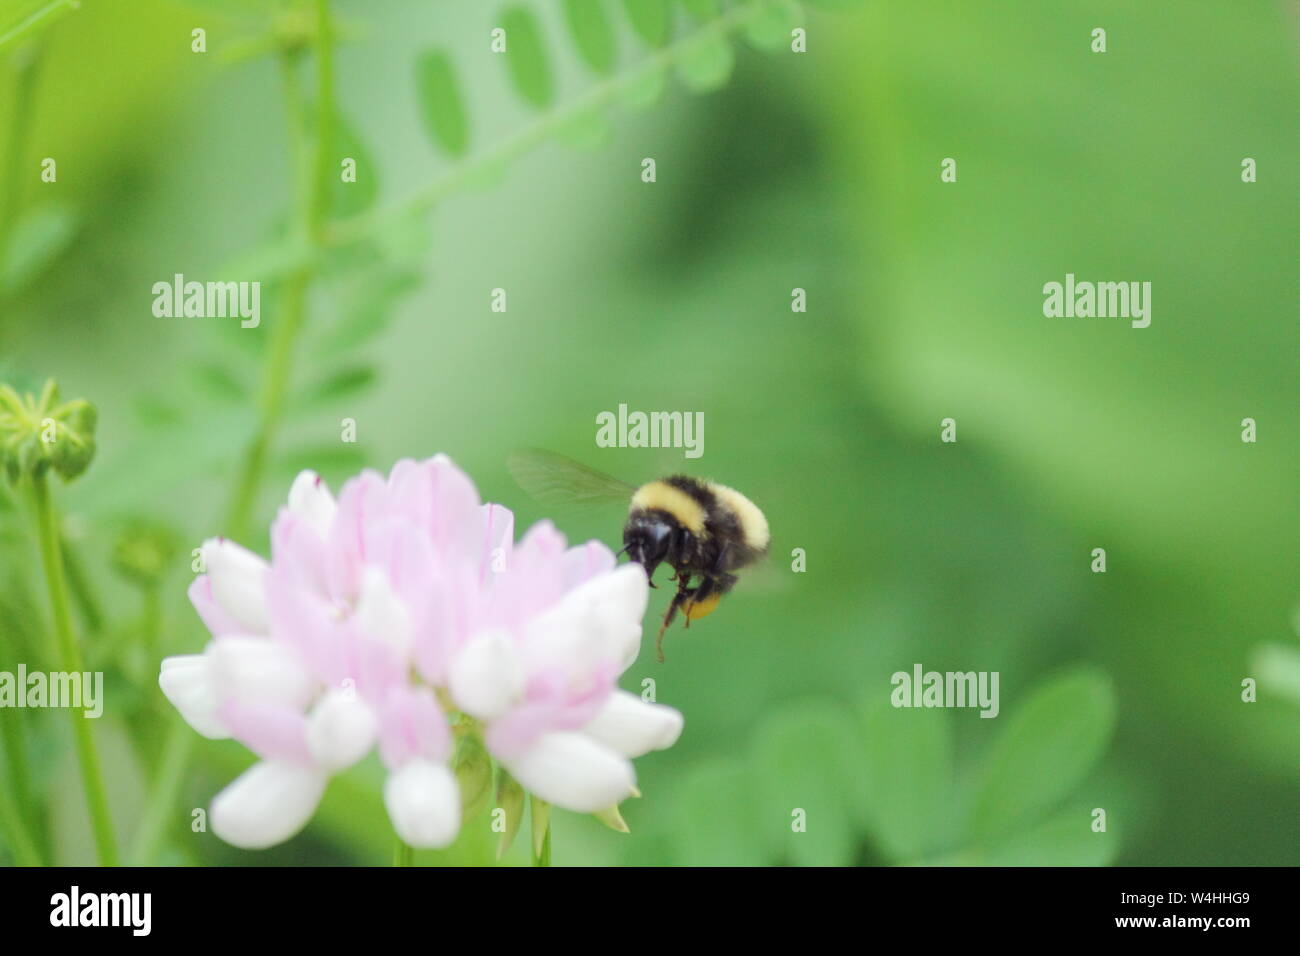 Bumblebee hovering behind a pink wildflower in the lower left of the photograph Stock Photo